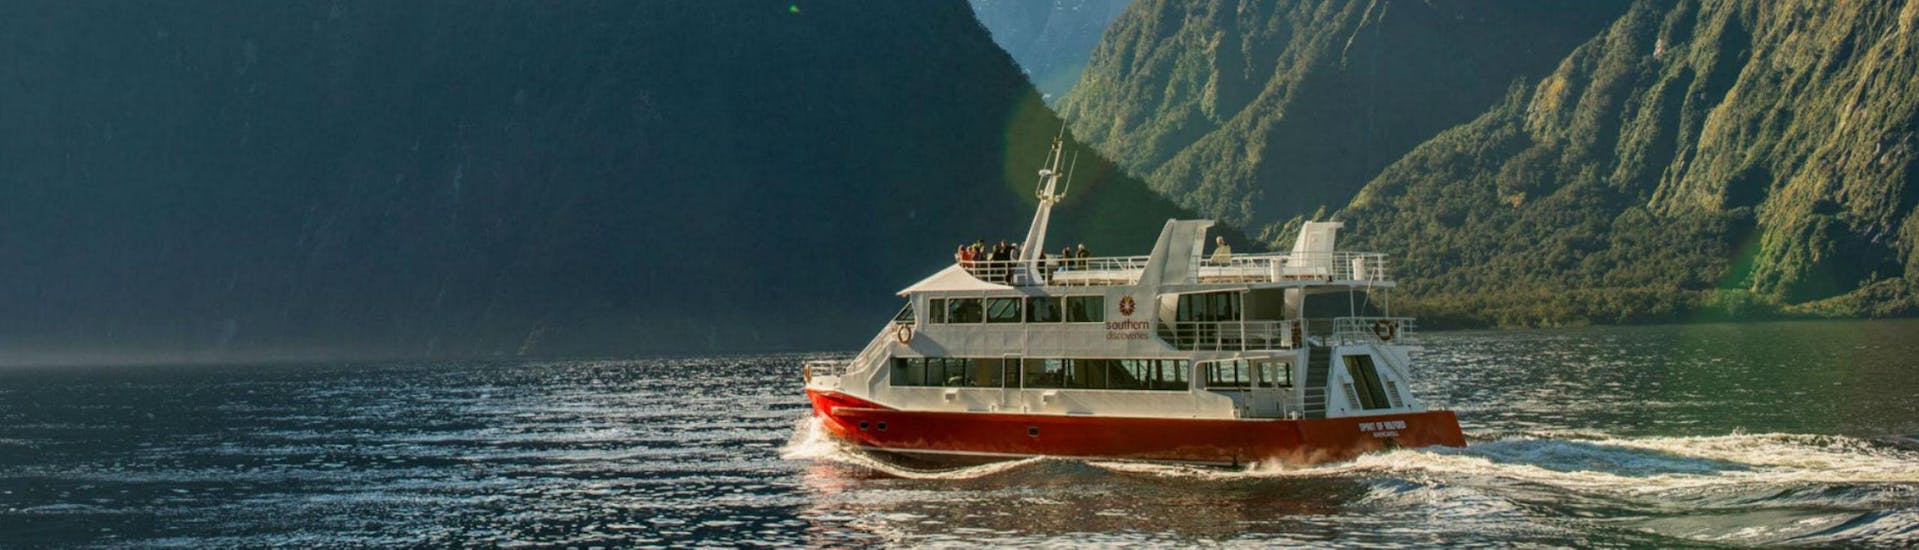 A Southern Discoveries catamaran is carrying a group of visitors along New Zealand's most famous fjord during the Nature Cruise in Milford Sound - Winter.